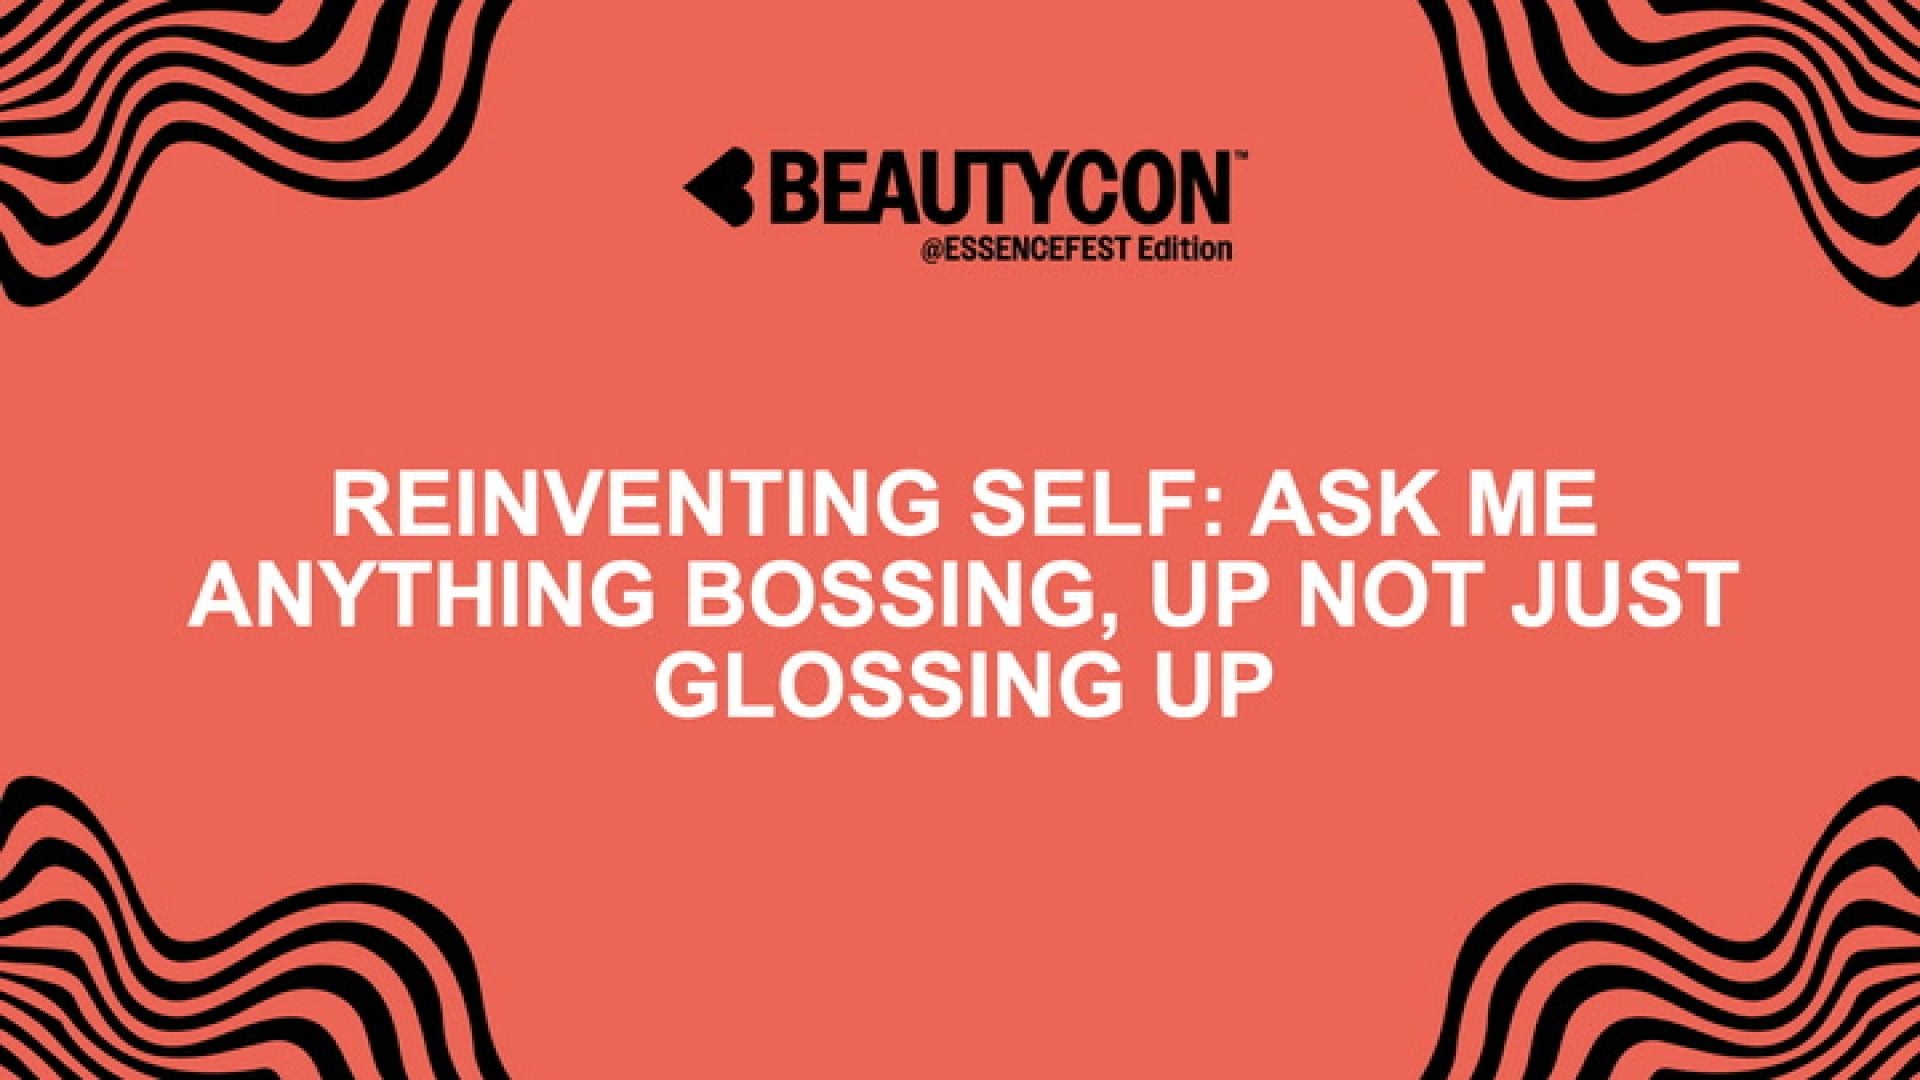 Ask Me Anything: Bossing Up, Not Just Glossing Up